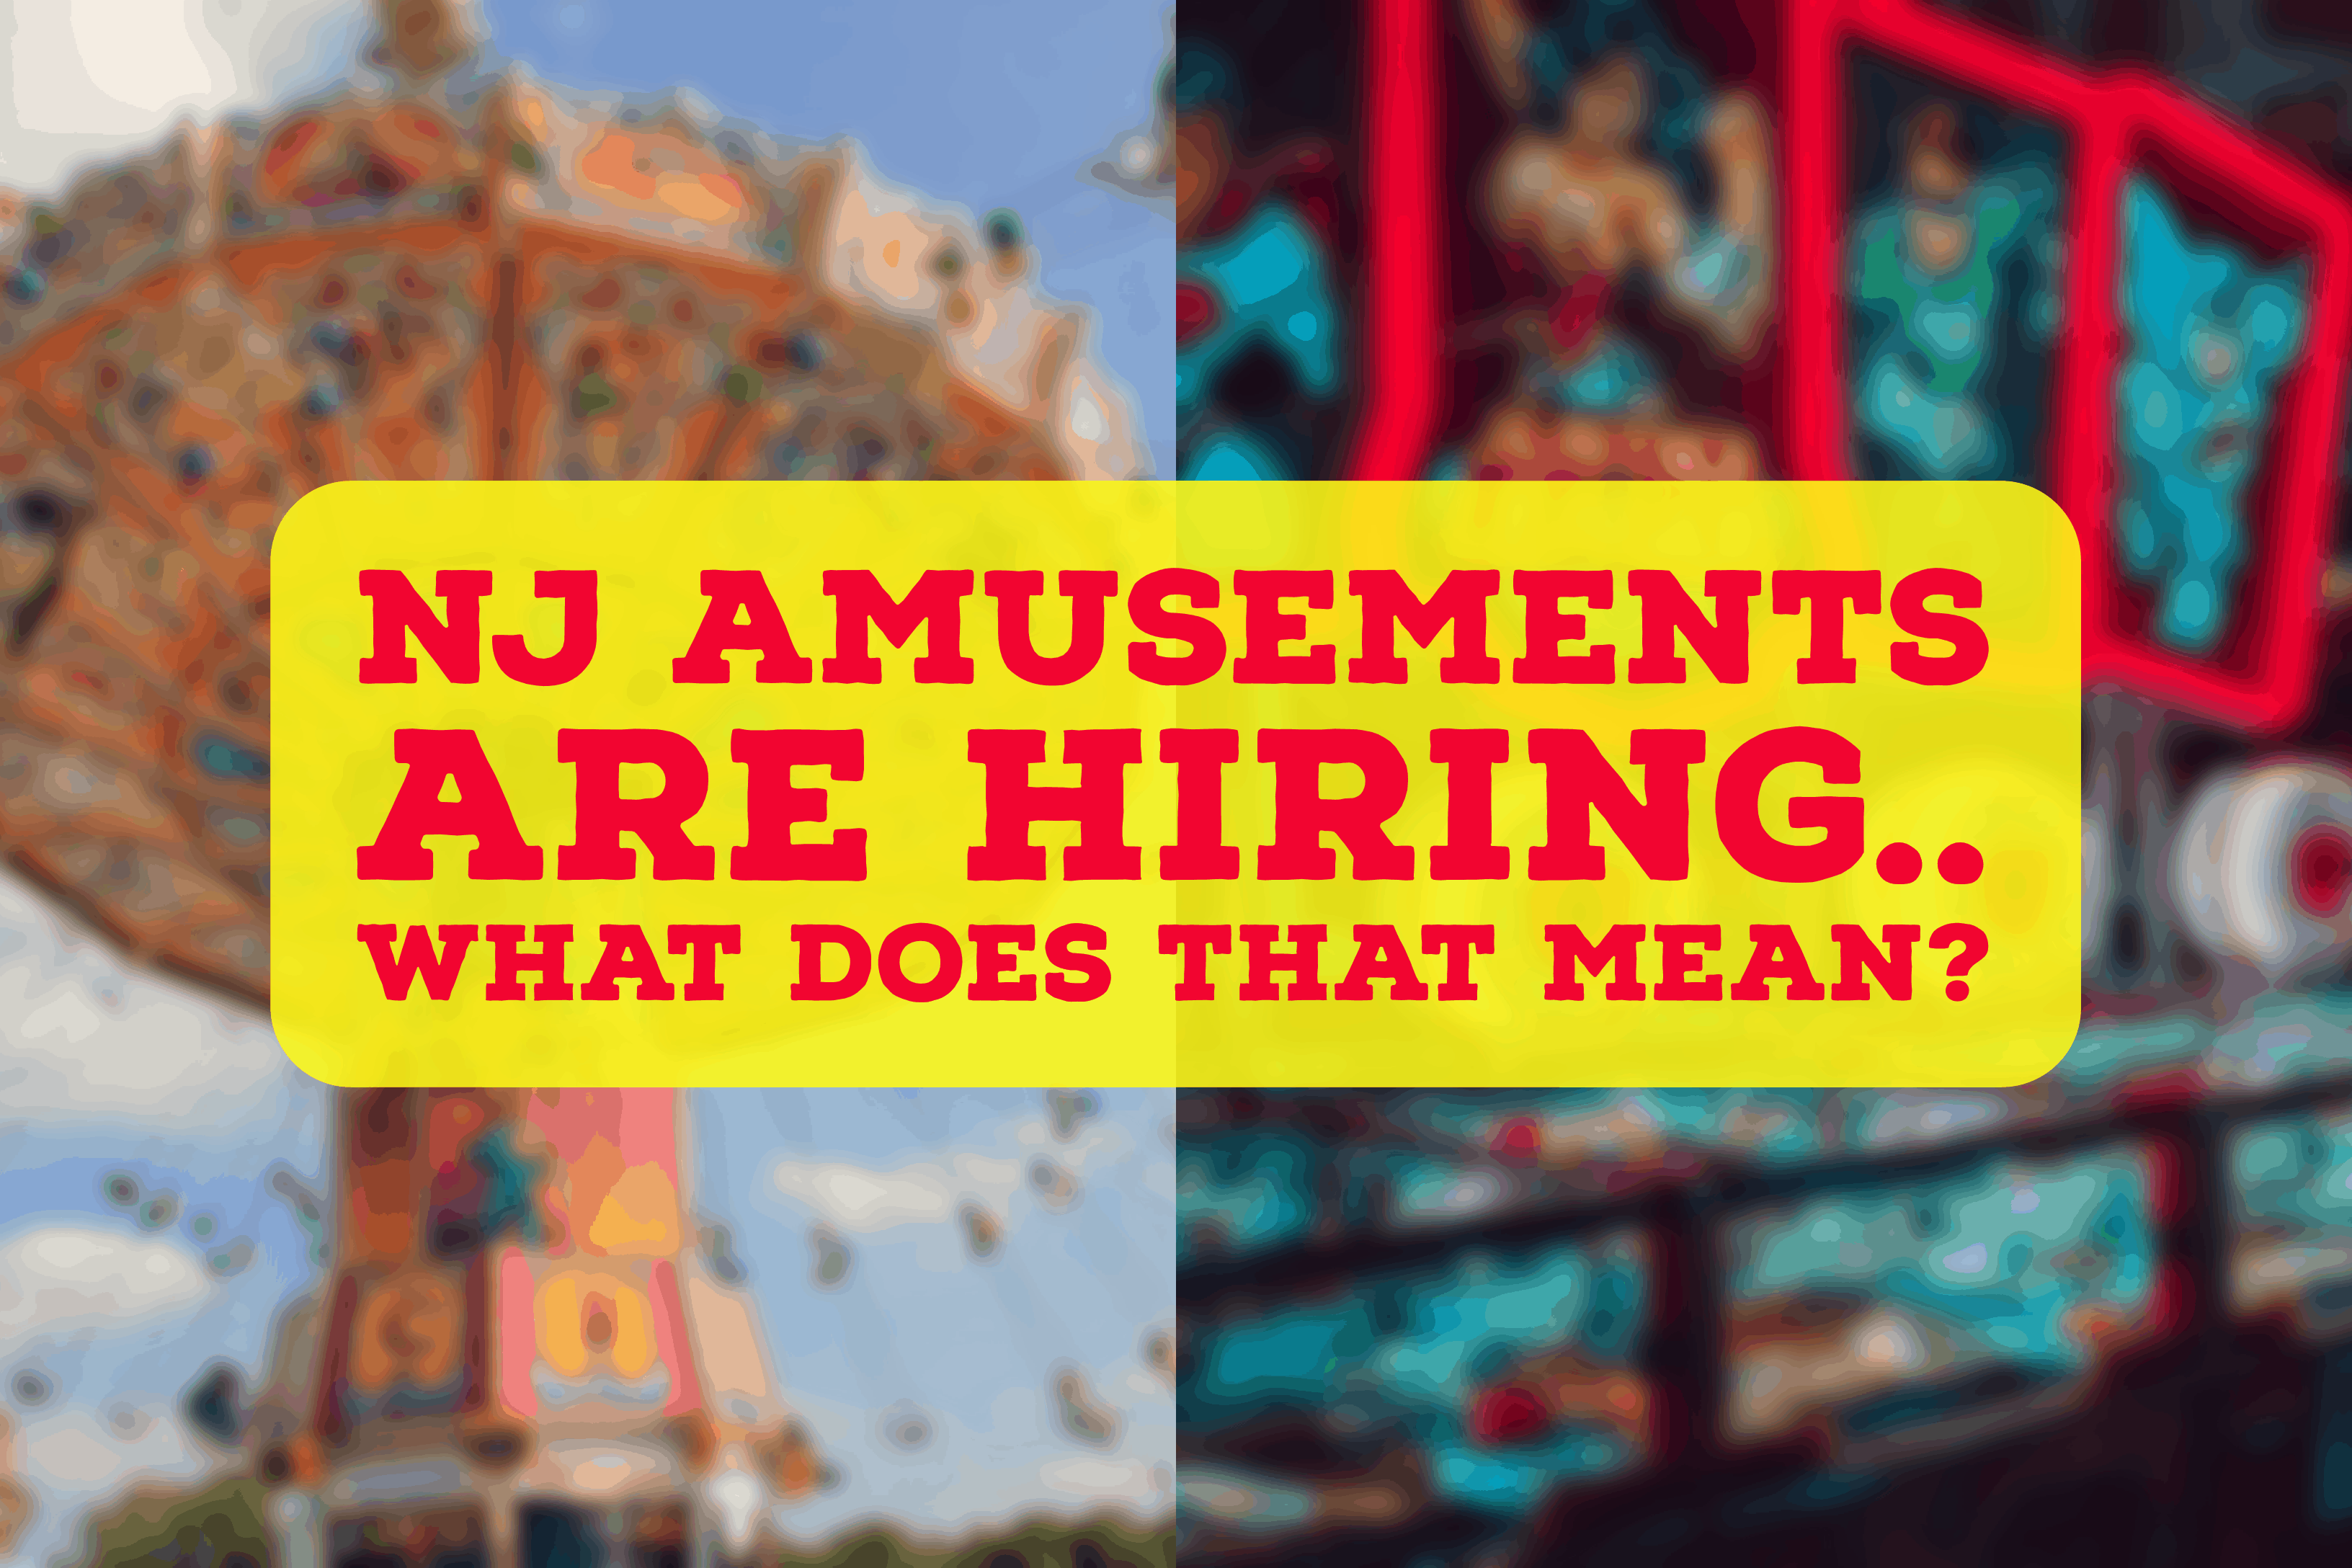 NJ Amusements Are Hiring… What Does This Mean For Arcades And Rides